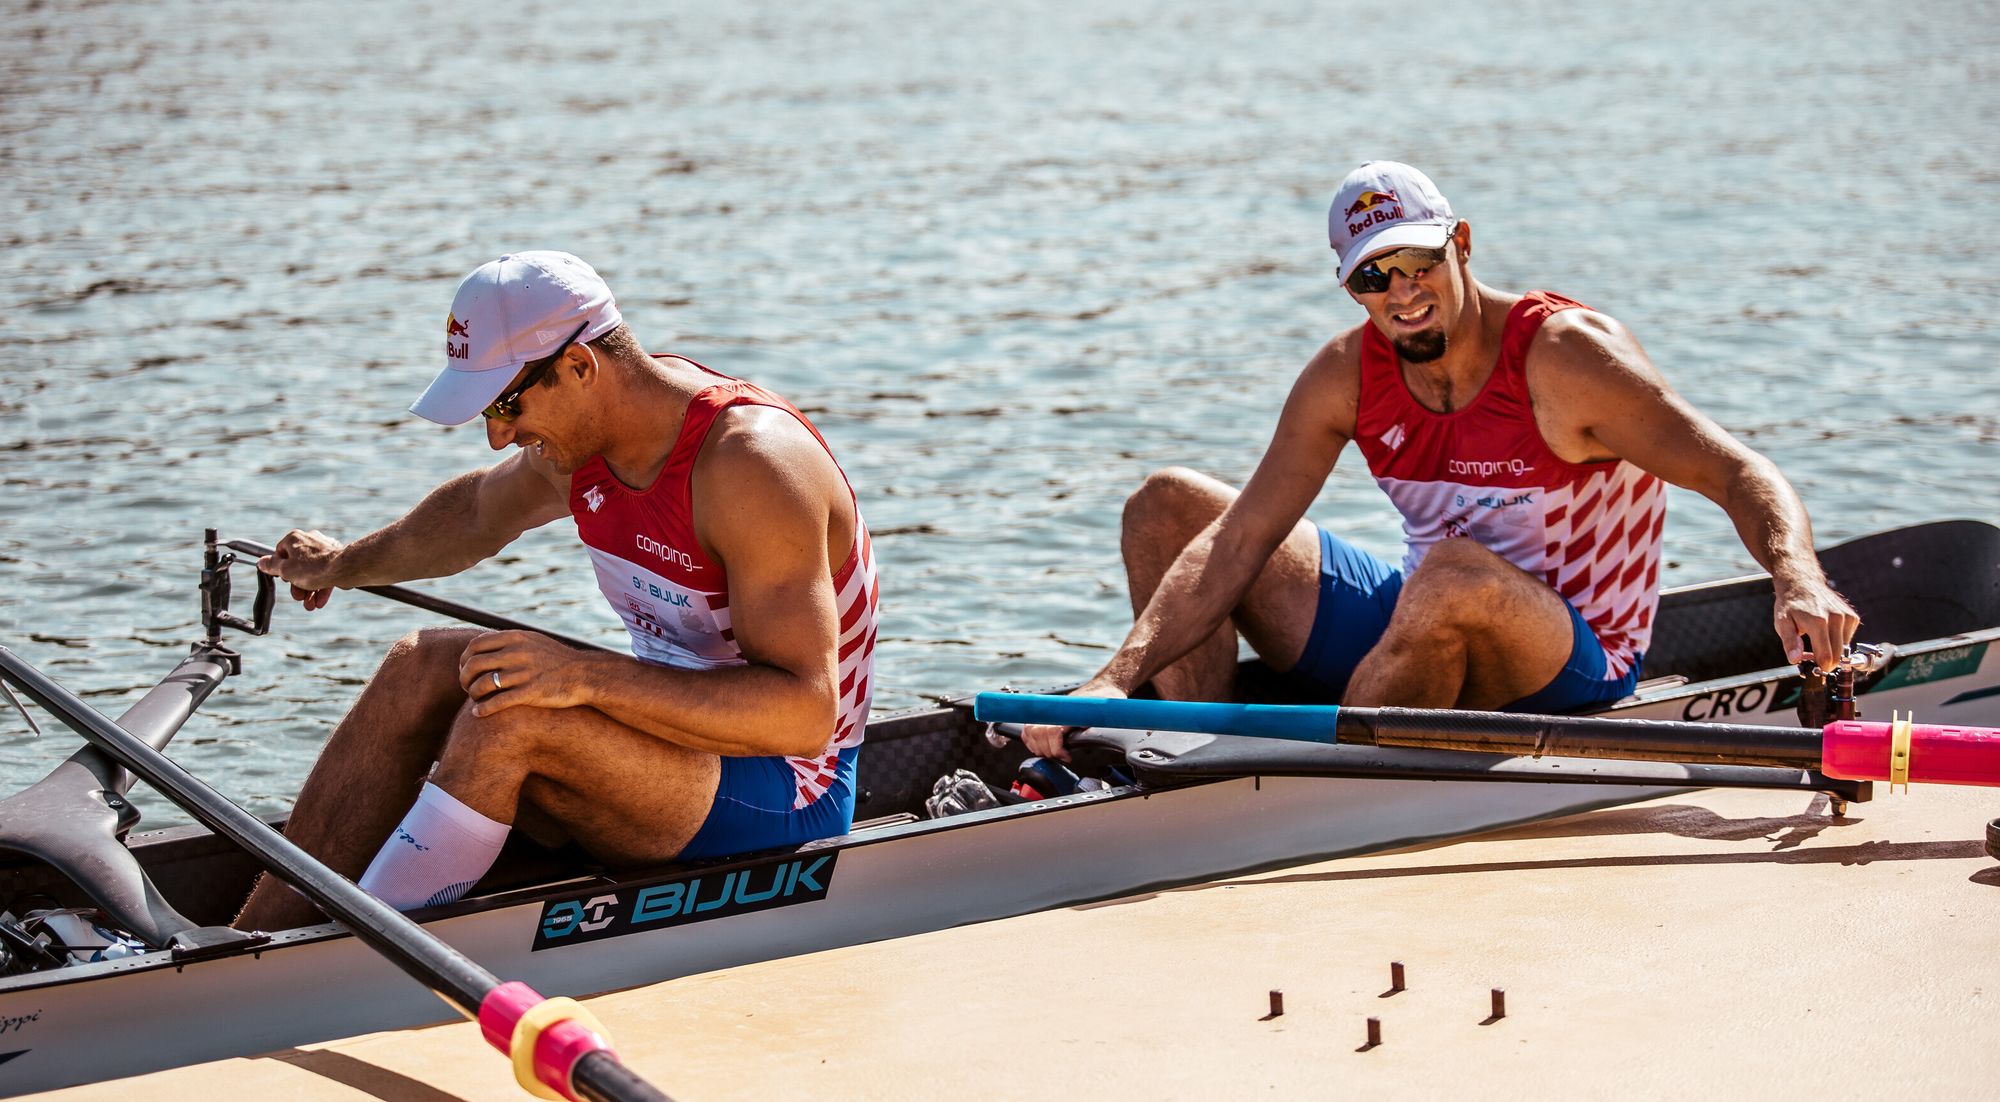 Croatia S Sinkovic Brothers Win Silver At World Rowing Cup